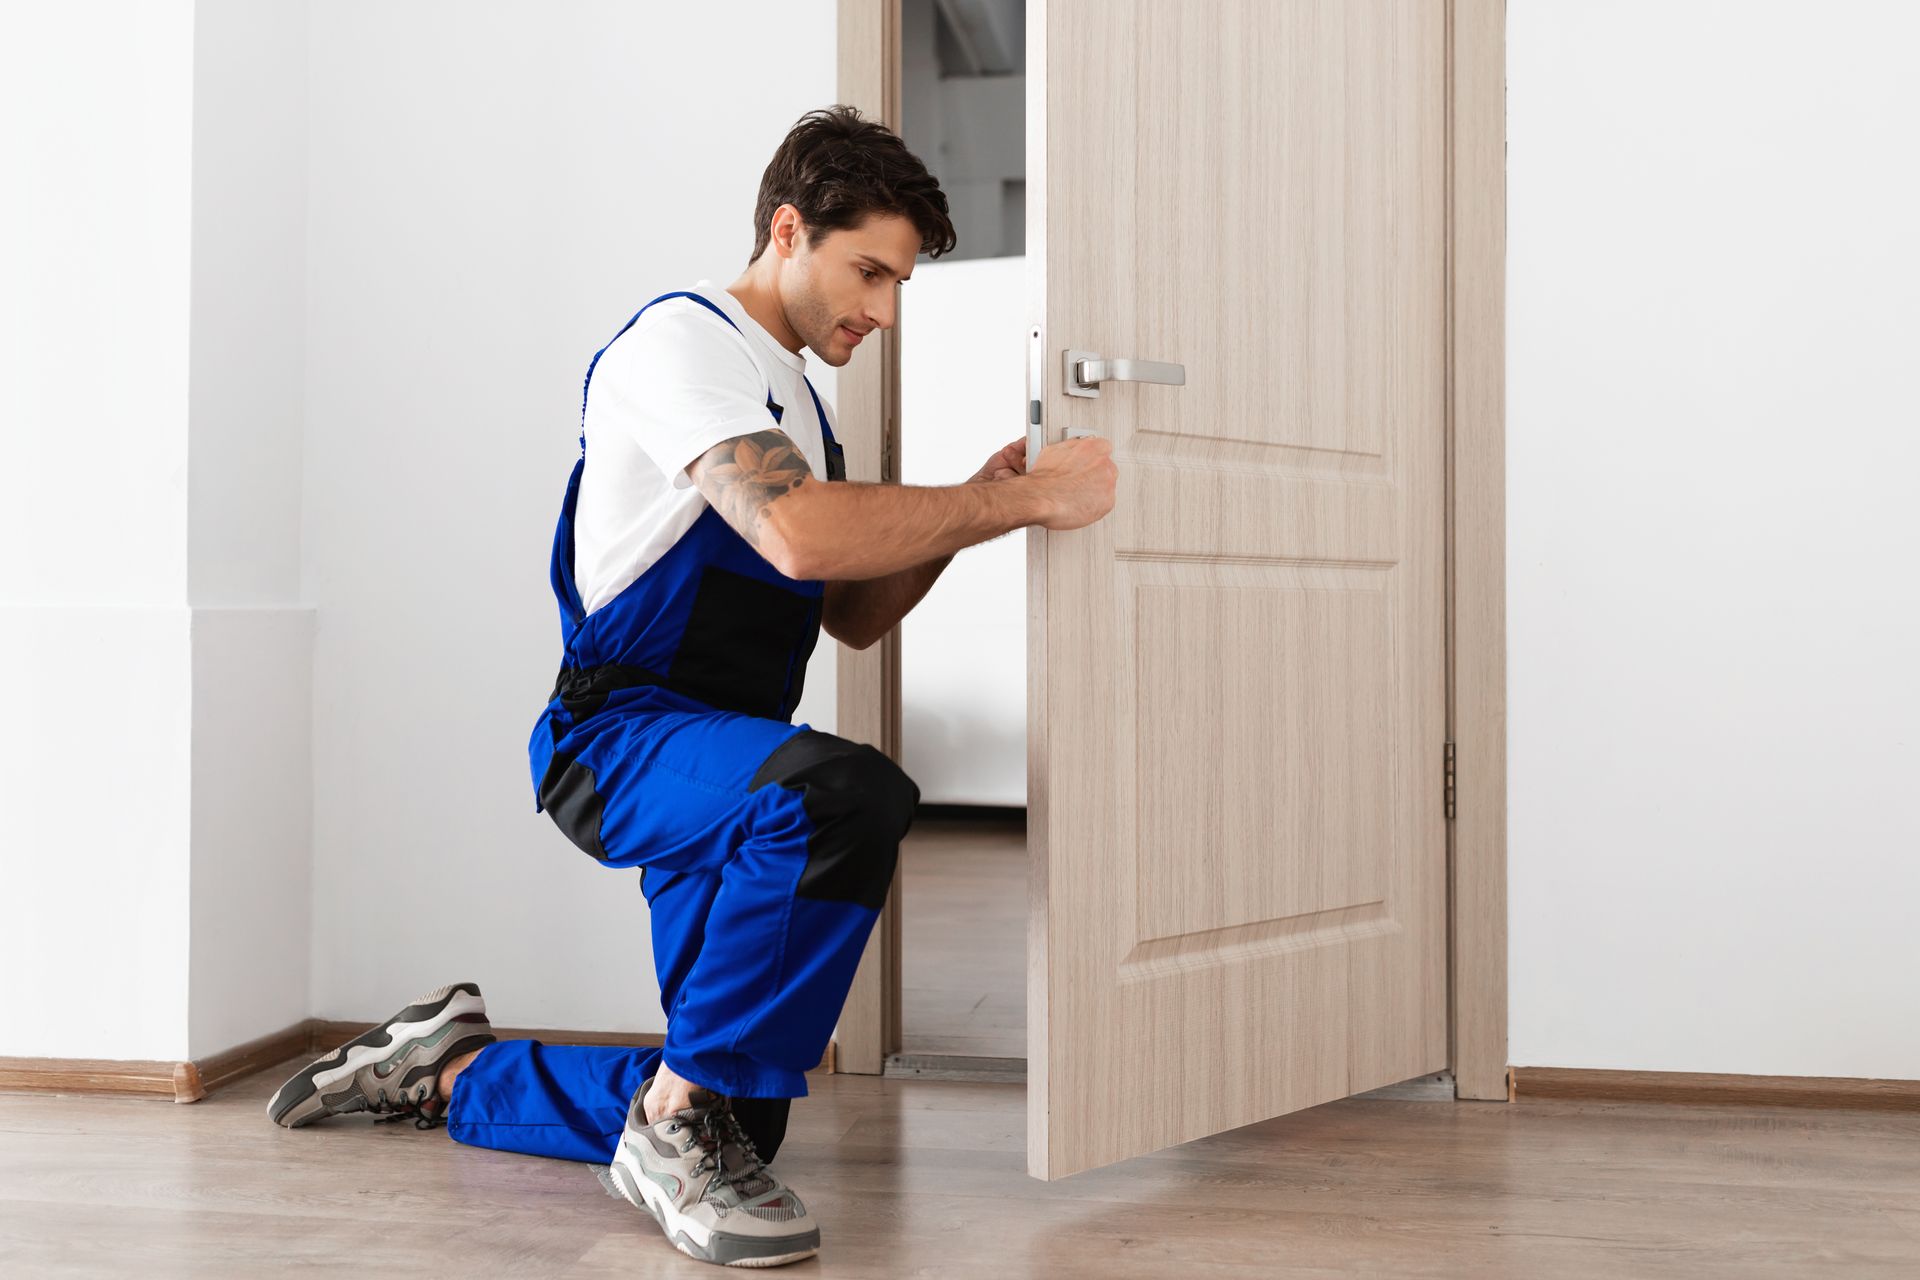 a man is kneeling down and fixing a door in a room